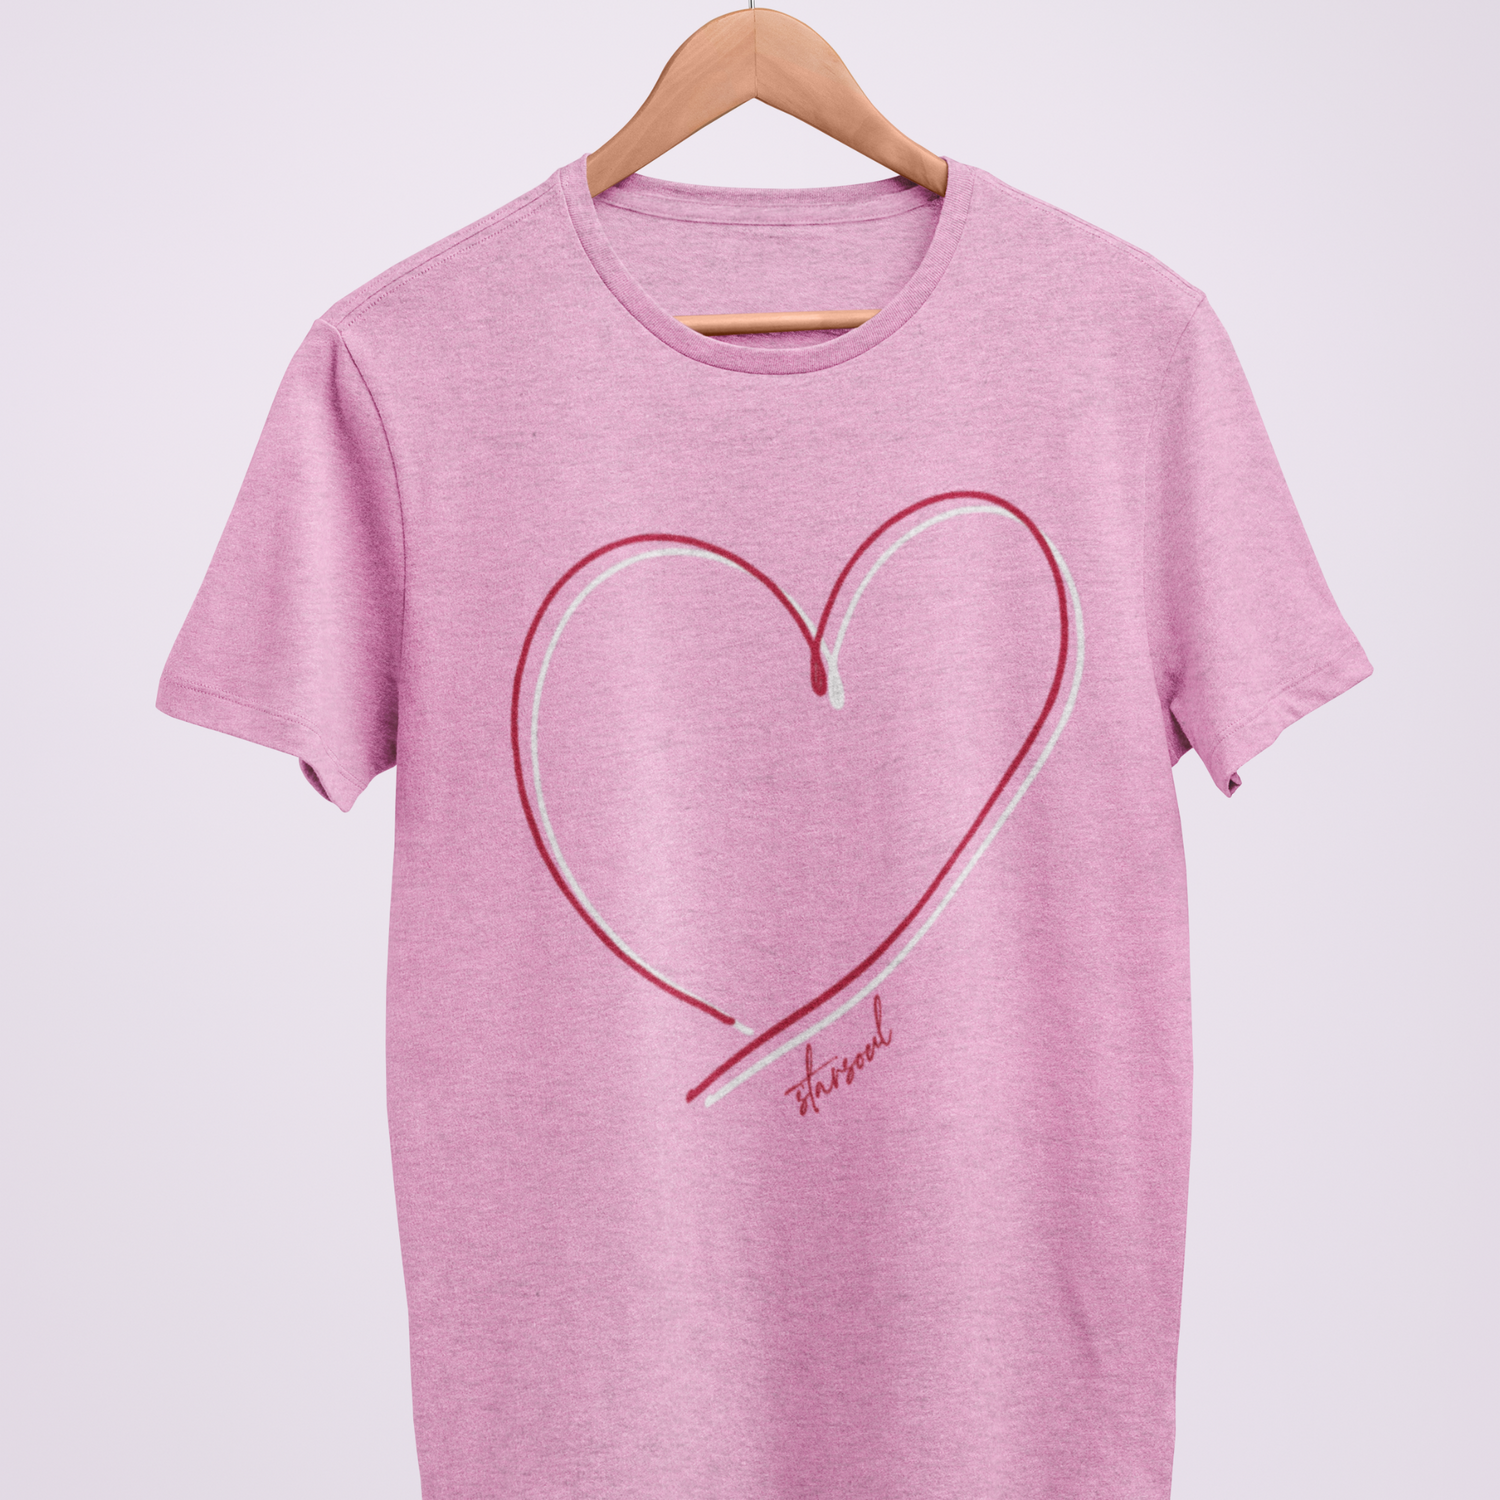 heather pink charity t-shirt with red ad white double heart design for heart disease, love valentine shirt